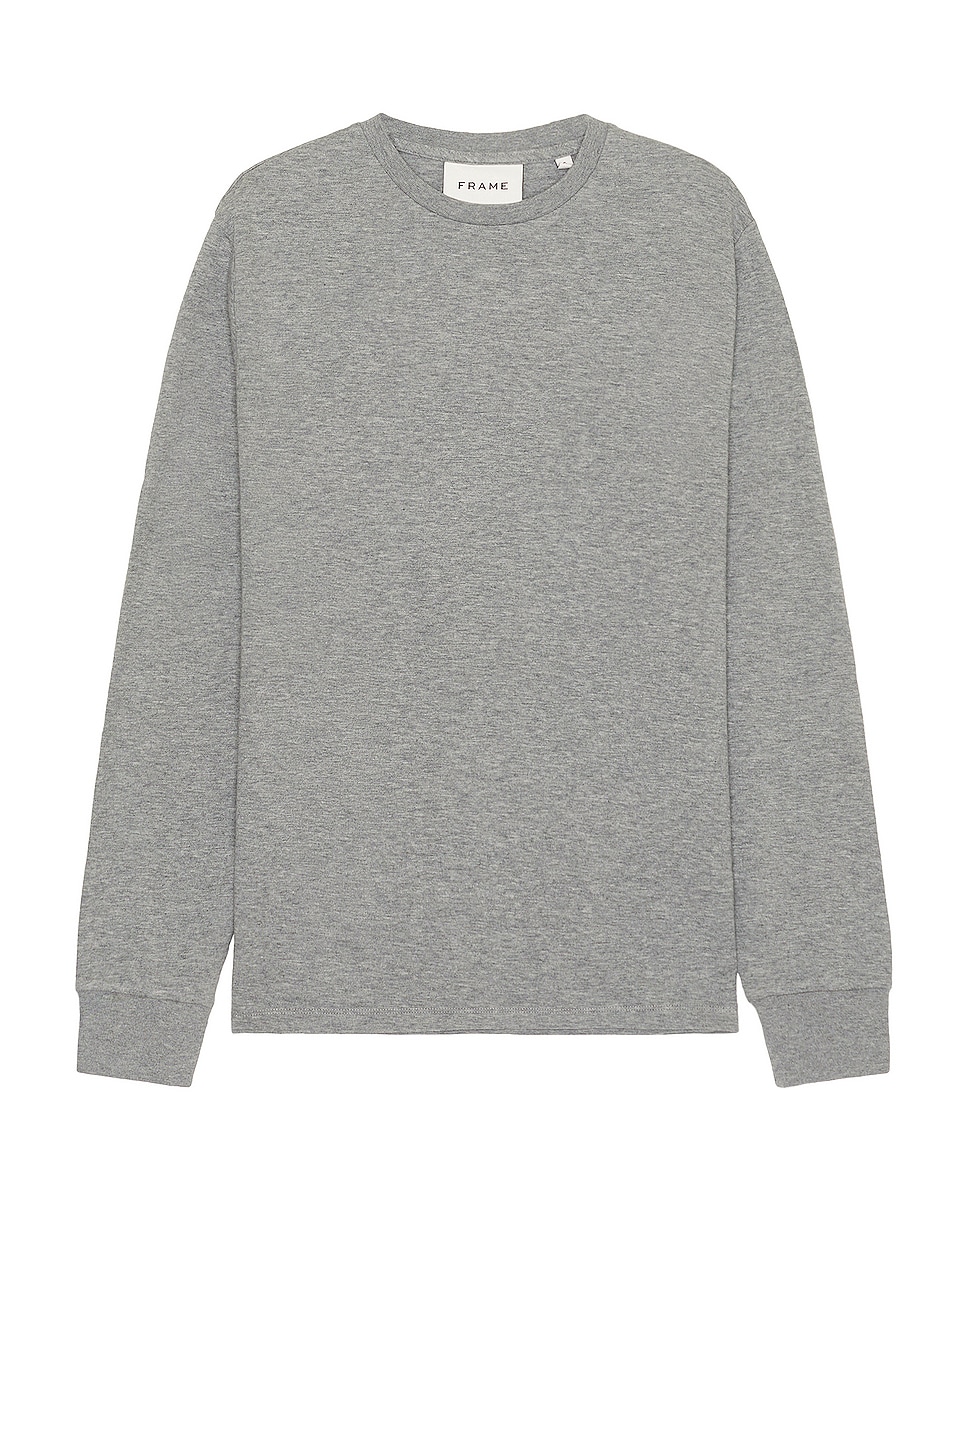 Image 1 of FRAME Duo Fold Long Sleeve Tee in Heather Grey